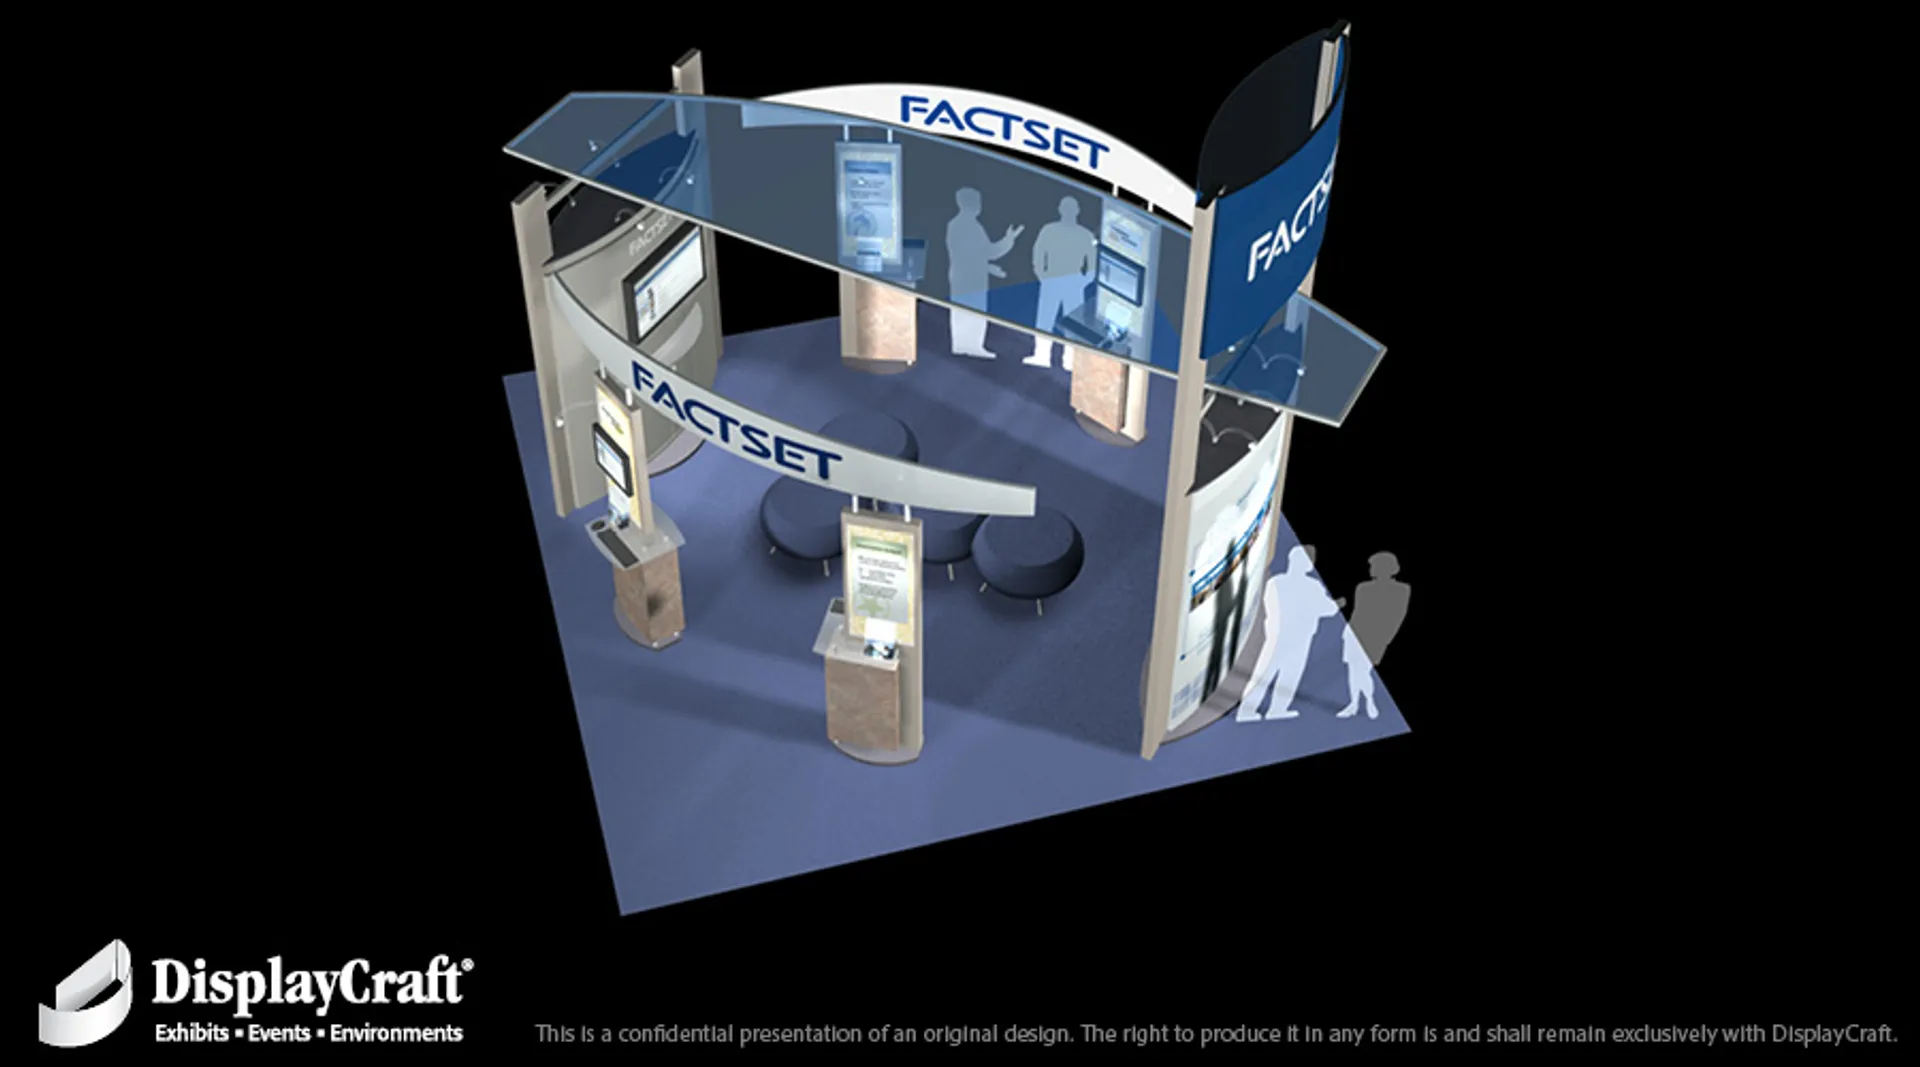 booth-design-projects/DisplayCraft/2024-04-03-20x20-ISLAND-Project-67/Factset 1-on3ctf.jpg